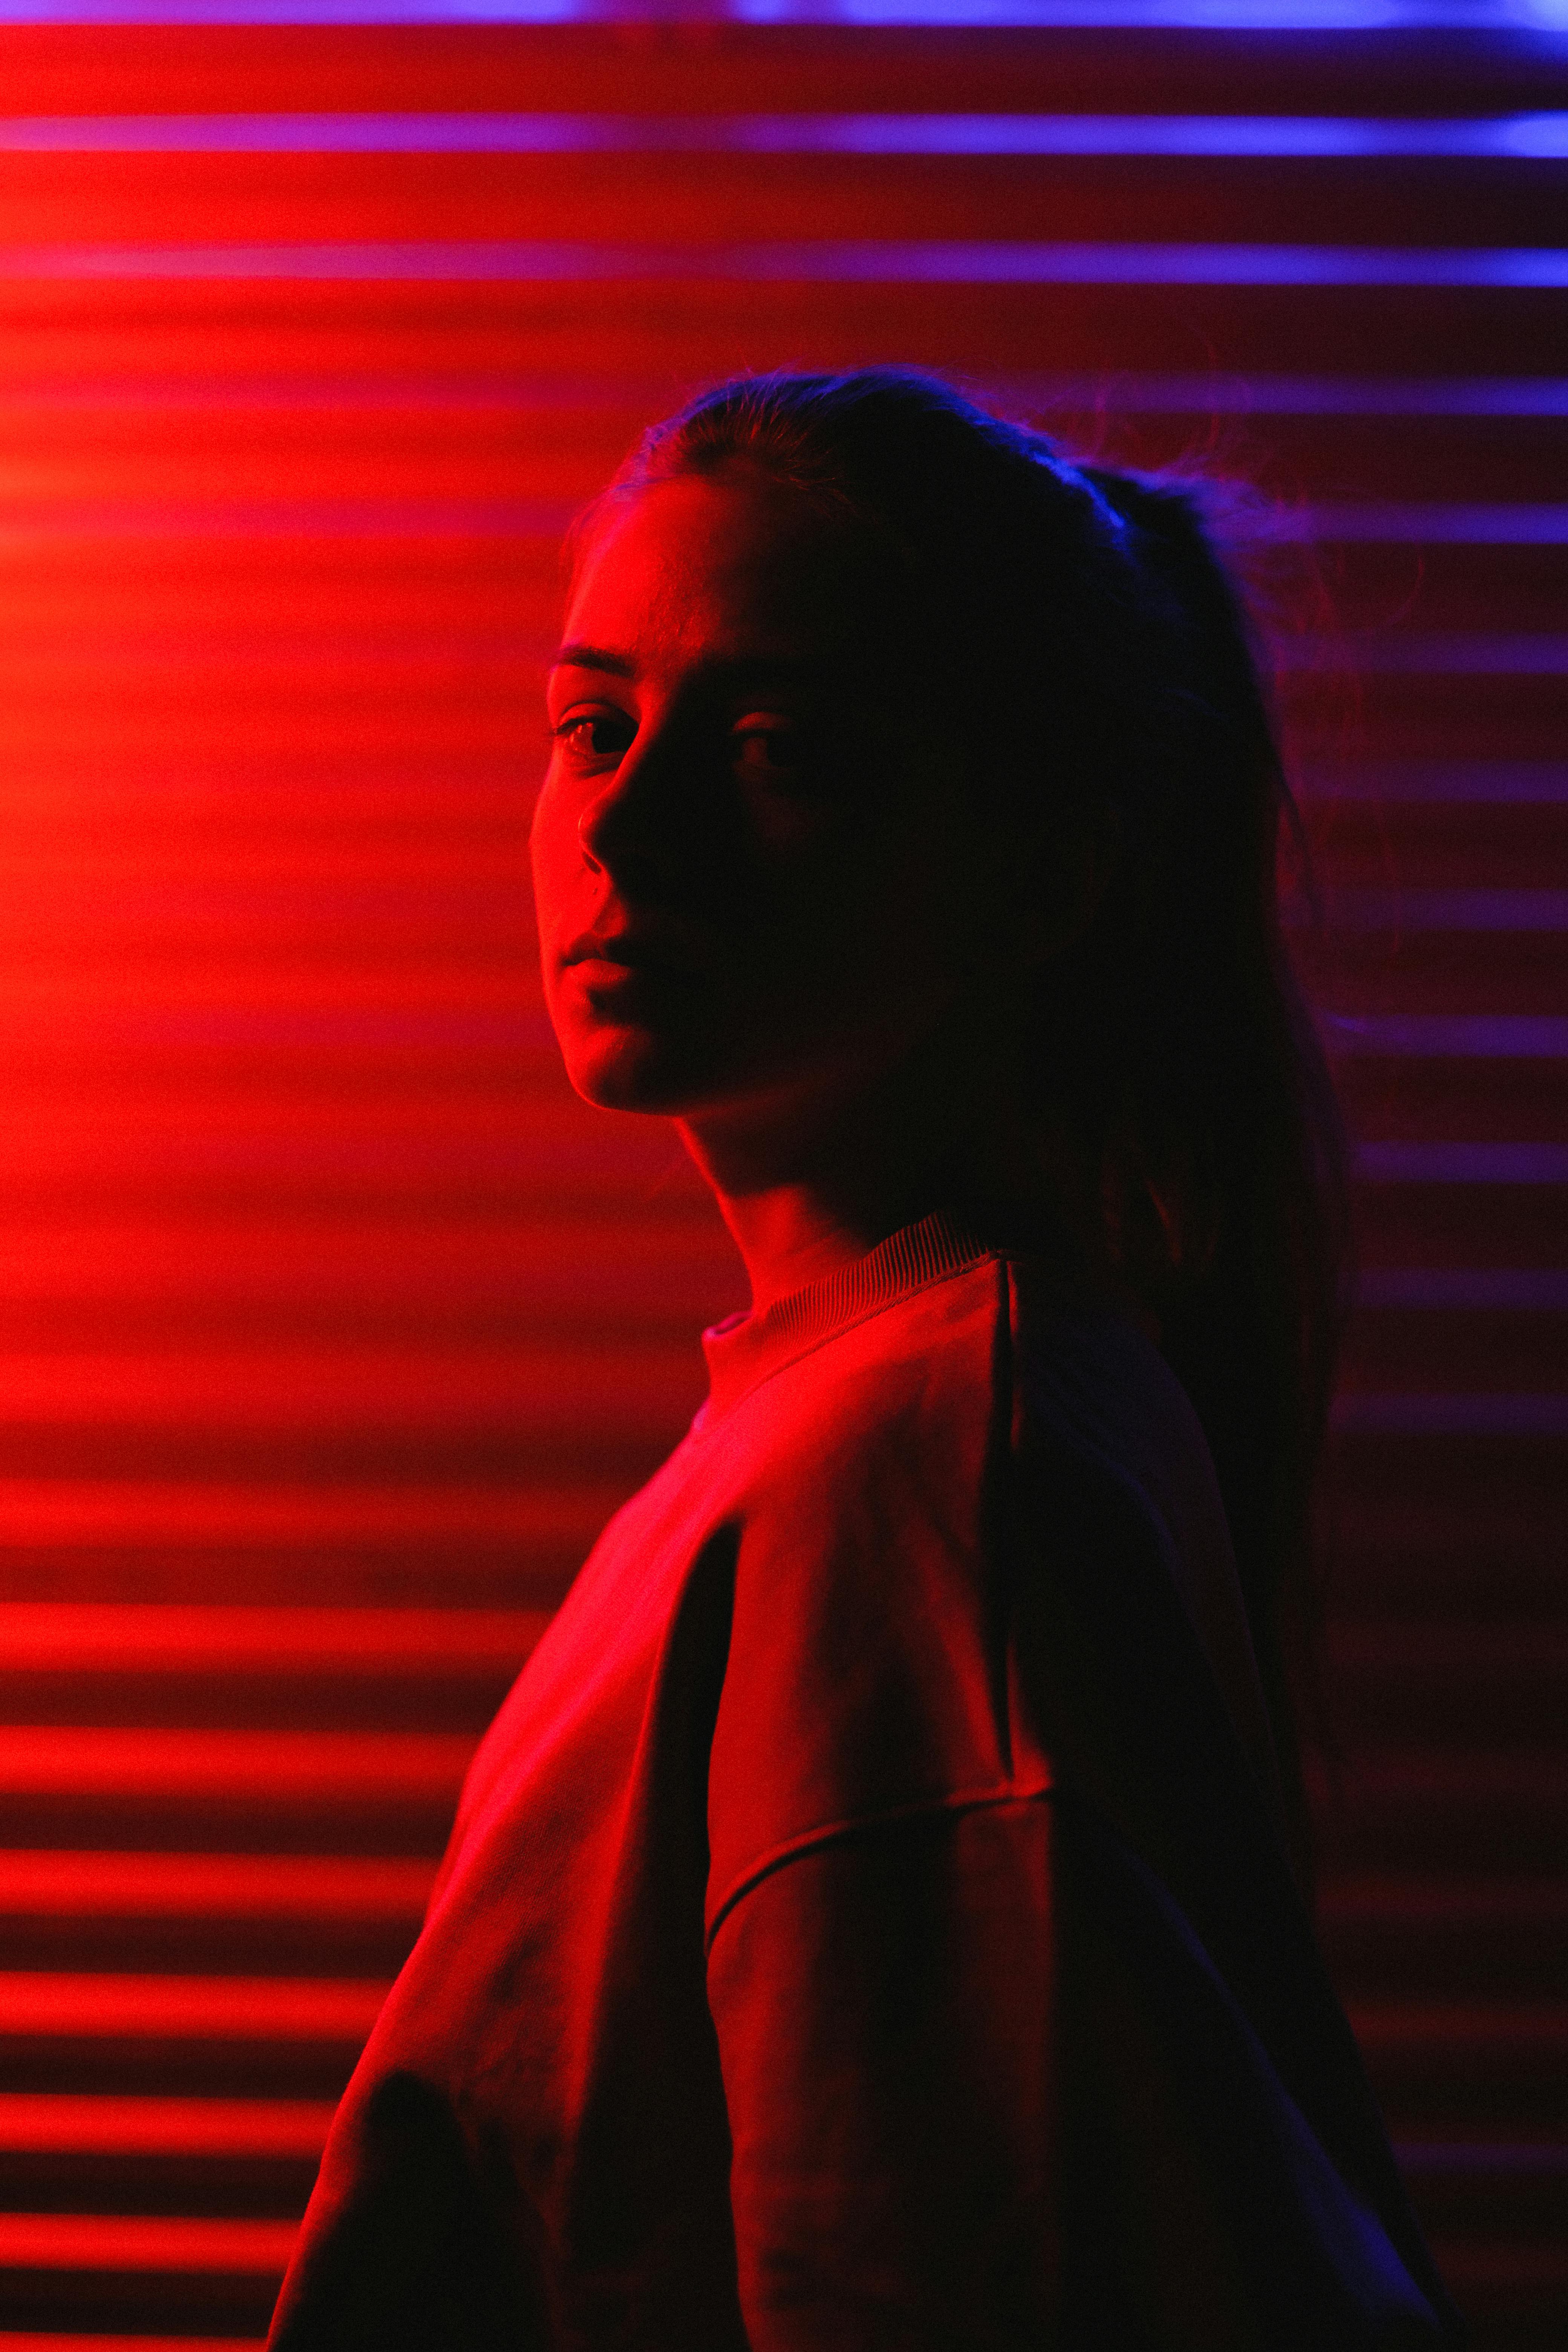 Woman Illuminated in Red Light Looking at Camera · Free Stock Photo